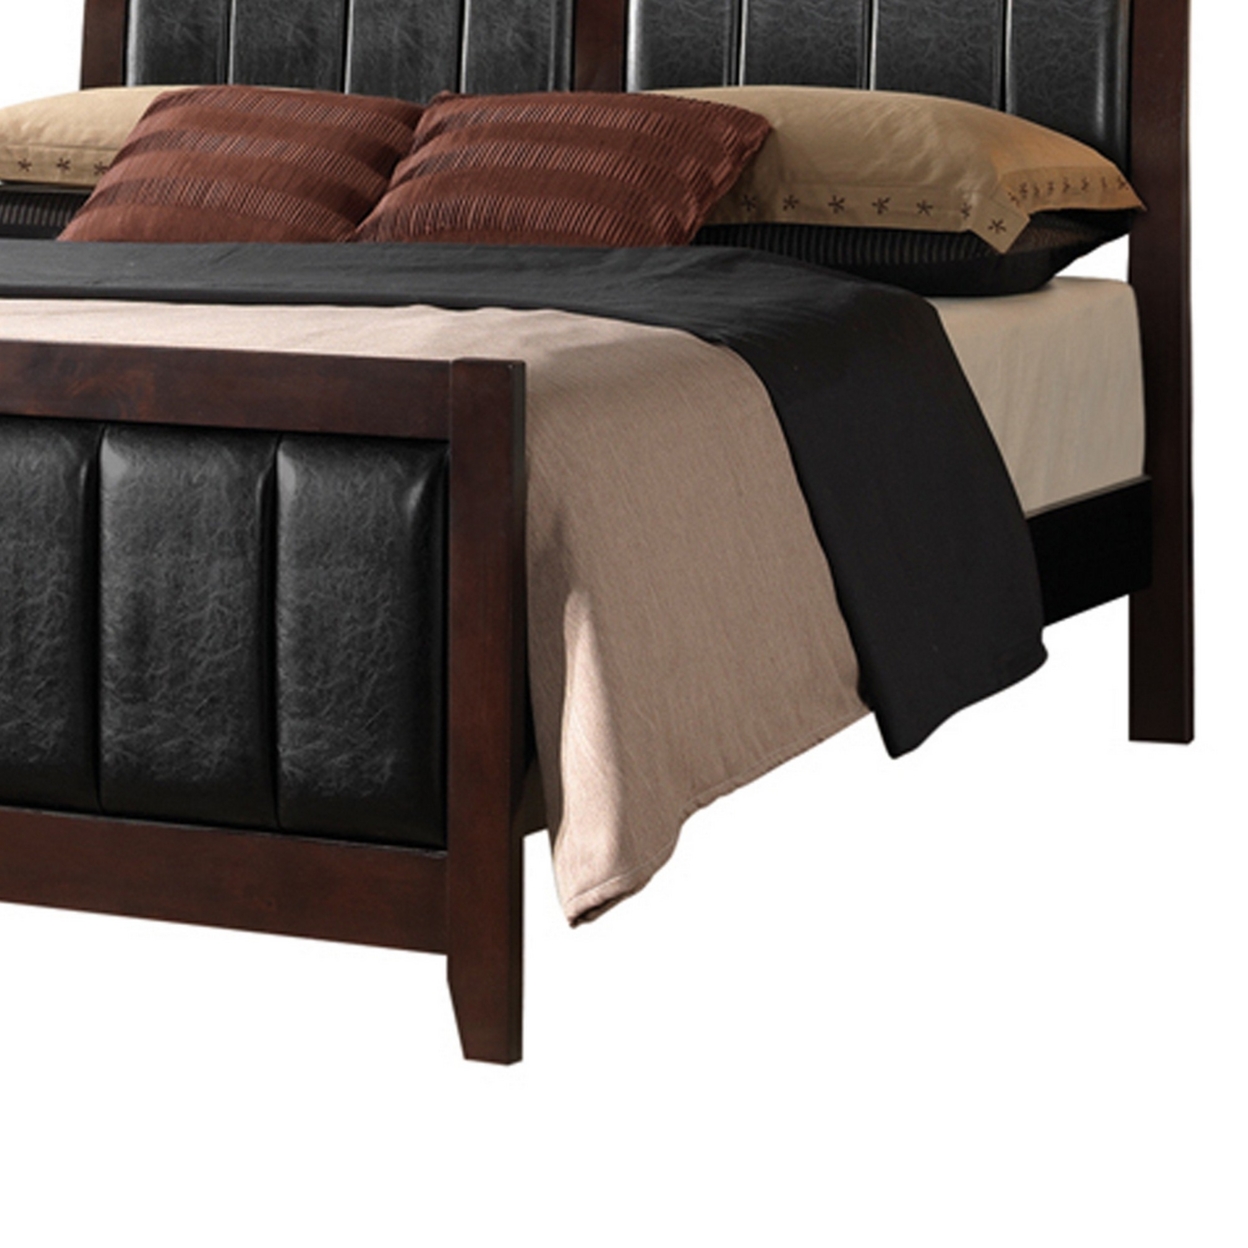 Leatherette Padded California King Bed With Vertical Channels, Brown- Saltoro Sherpi